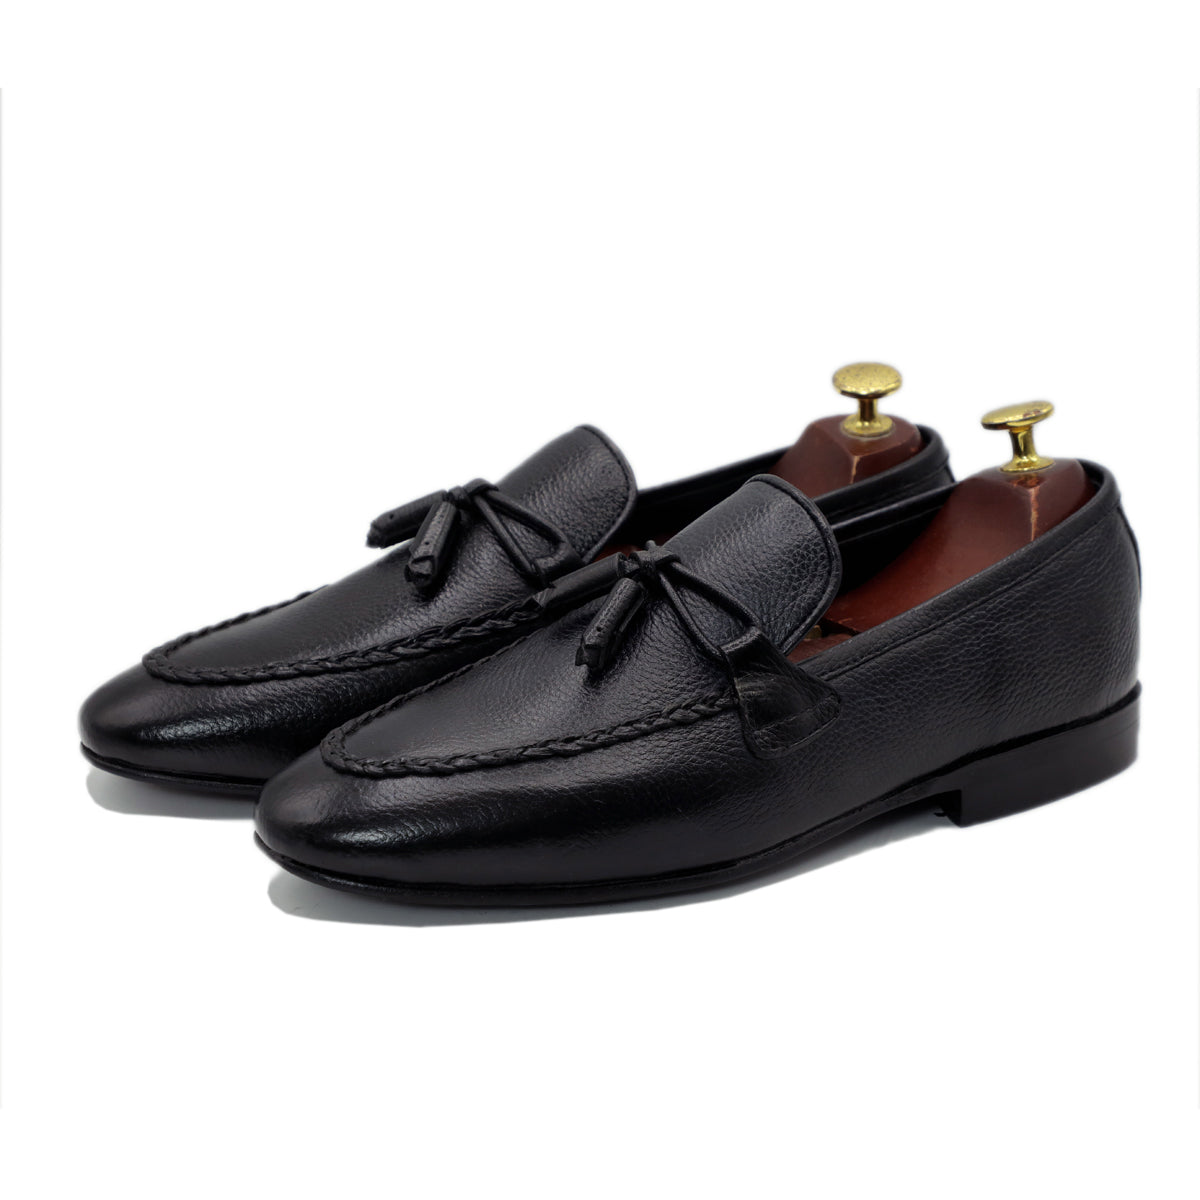 Le Tassel – Le Sole - Luxury Handmade Leather Shoes For Men and Women